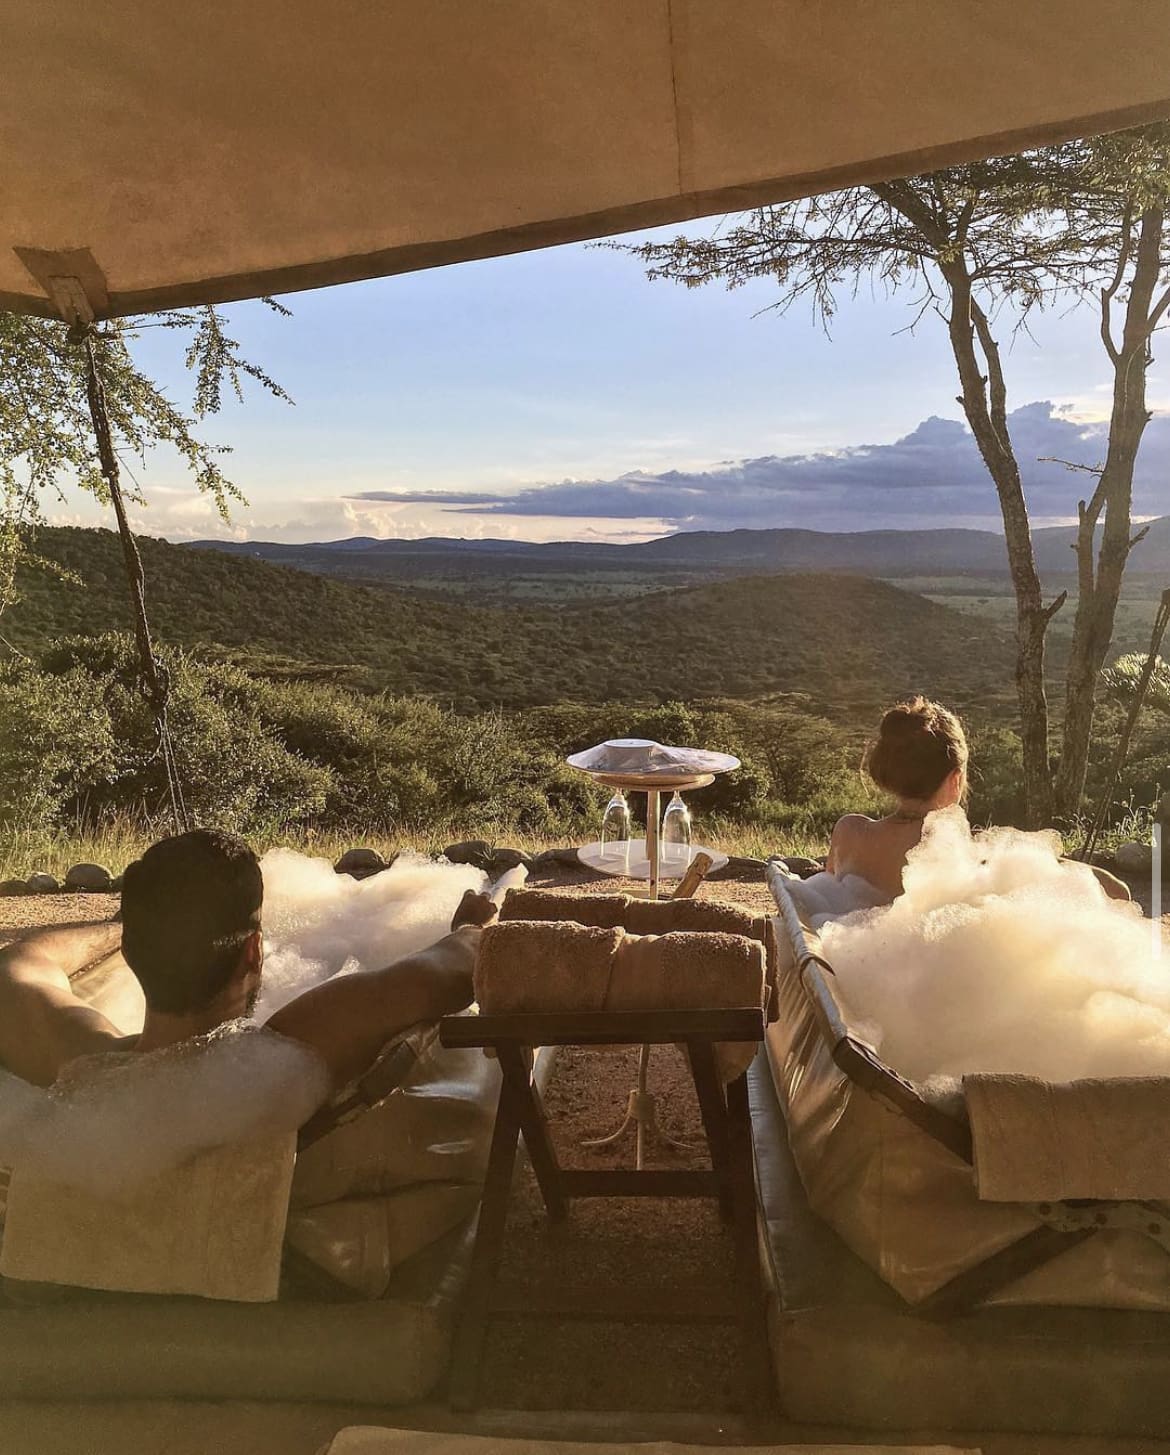 His and Hers bubble baths in a luxury safari lodge in Kenya